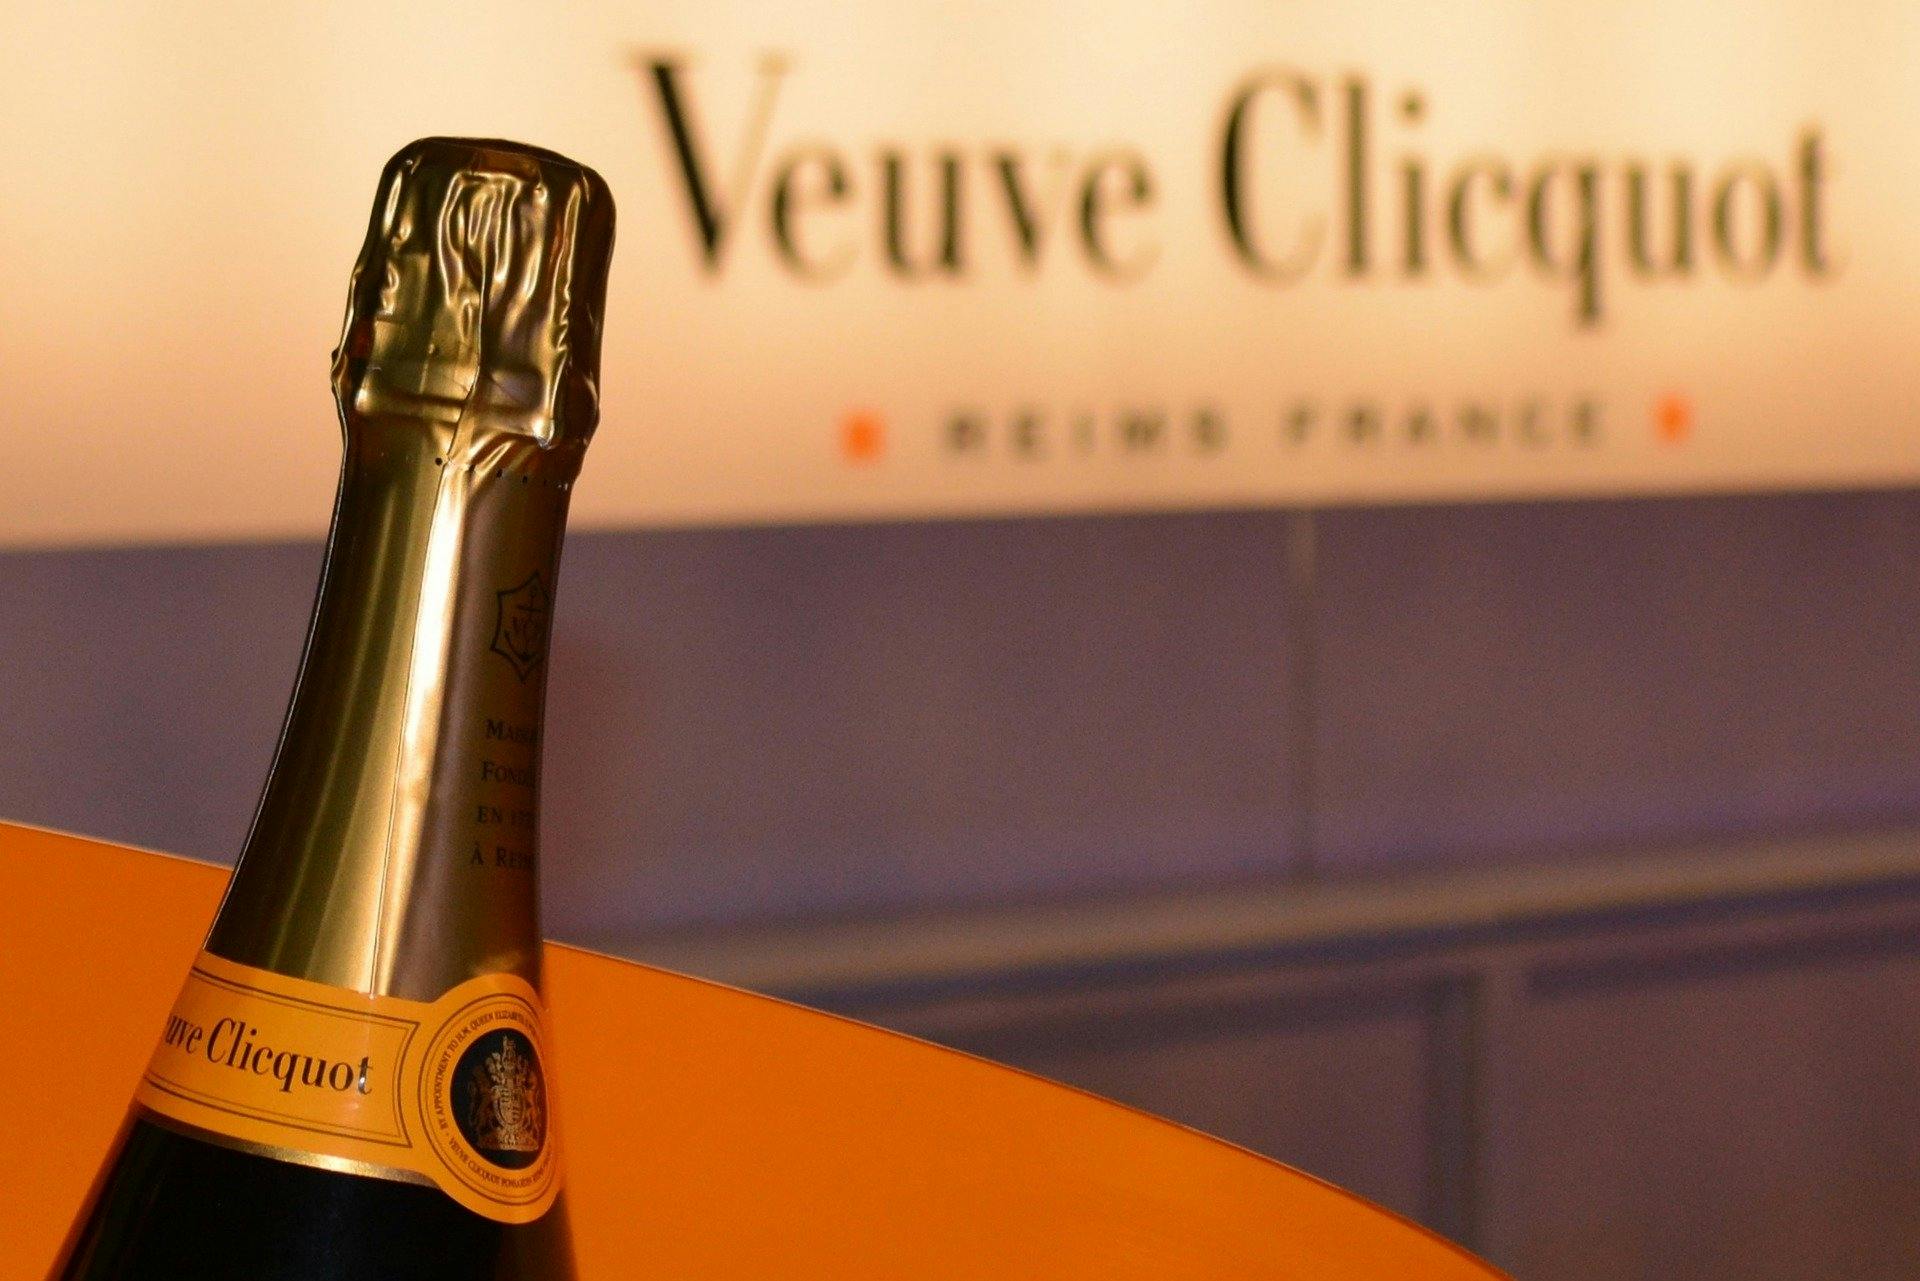 Full-Day Tour and Tasting Veuve Clicquot & Local Winery with Lunch